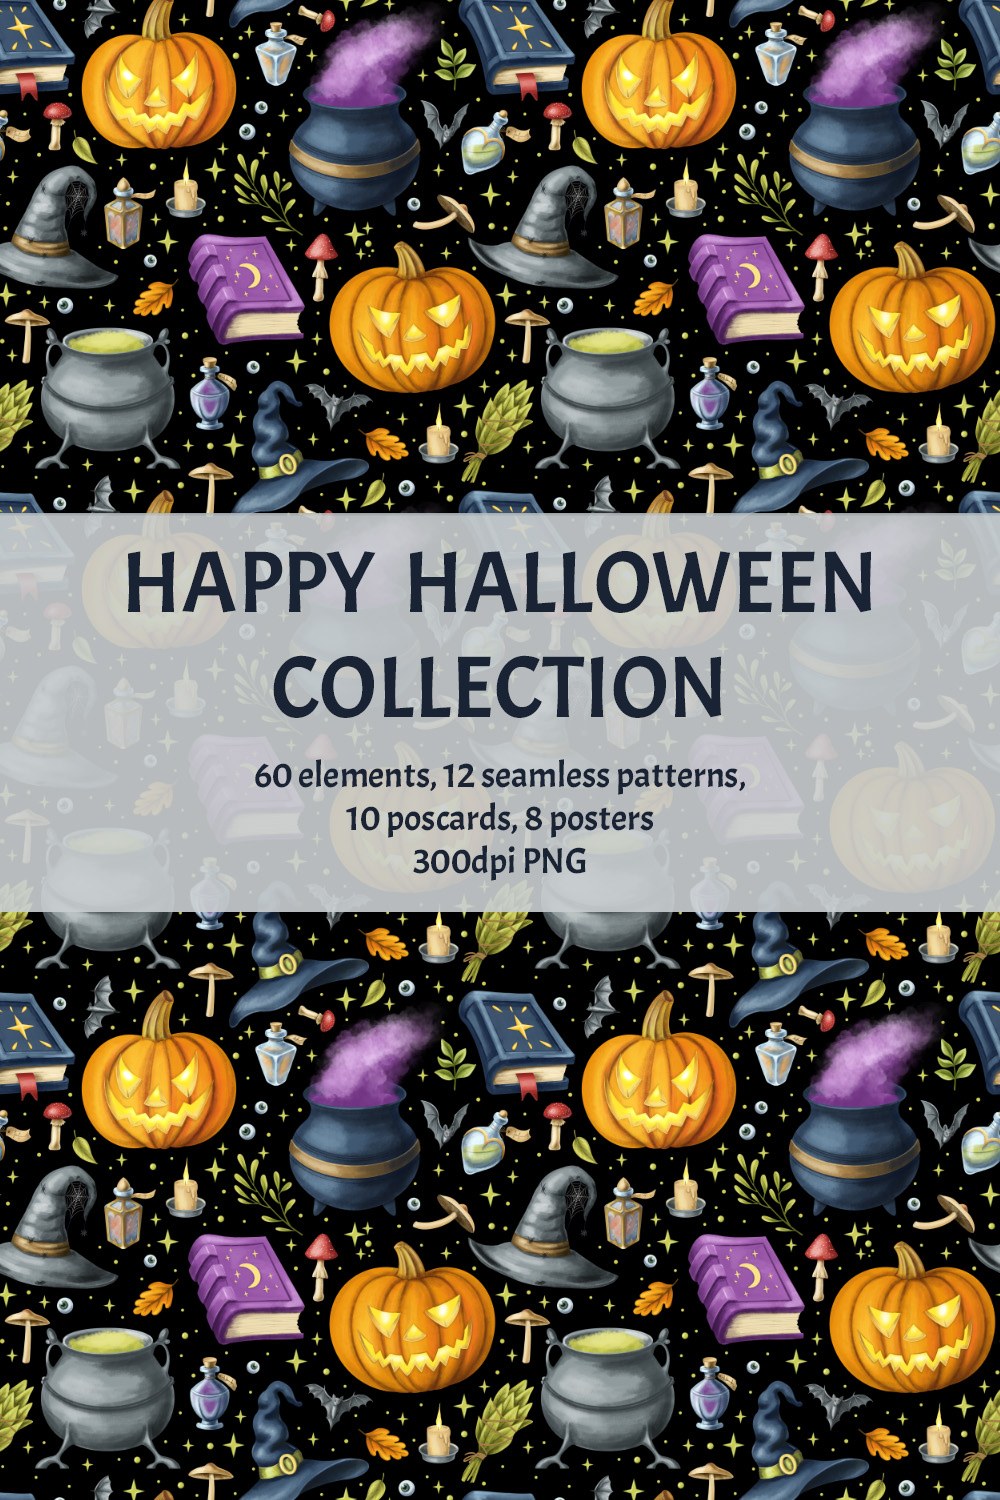 Happy Halloween collections pinterest preview image.